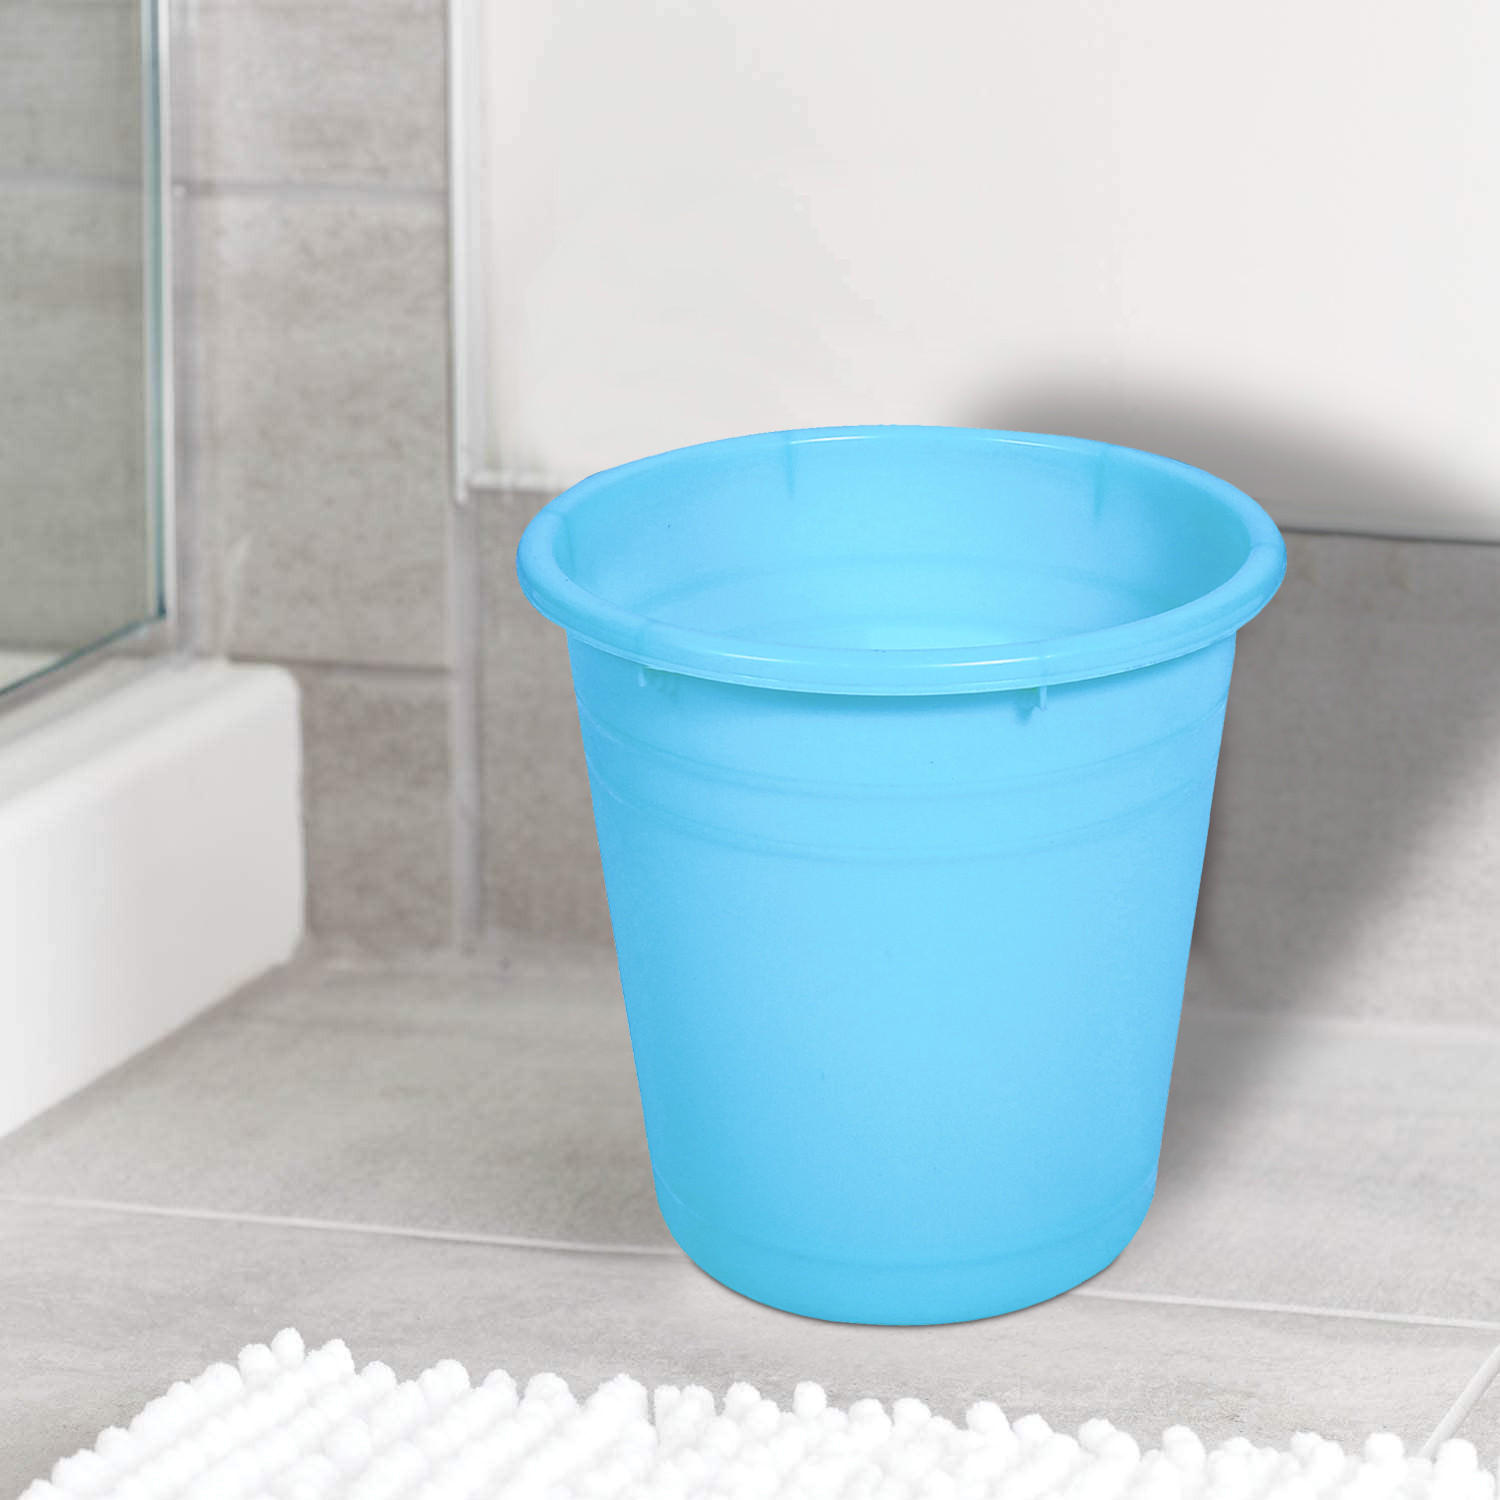 Kuber Industries Plastic Dustbin|Portable Garbage Basket & Round Trash Can for Home,Kitchen,Office,College,7 Ltr.(Sky Blue)